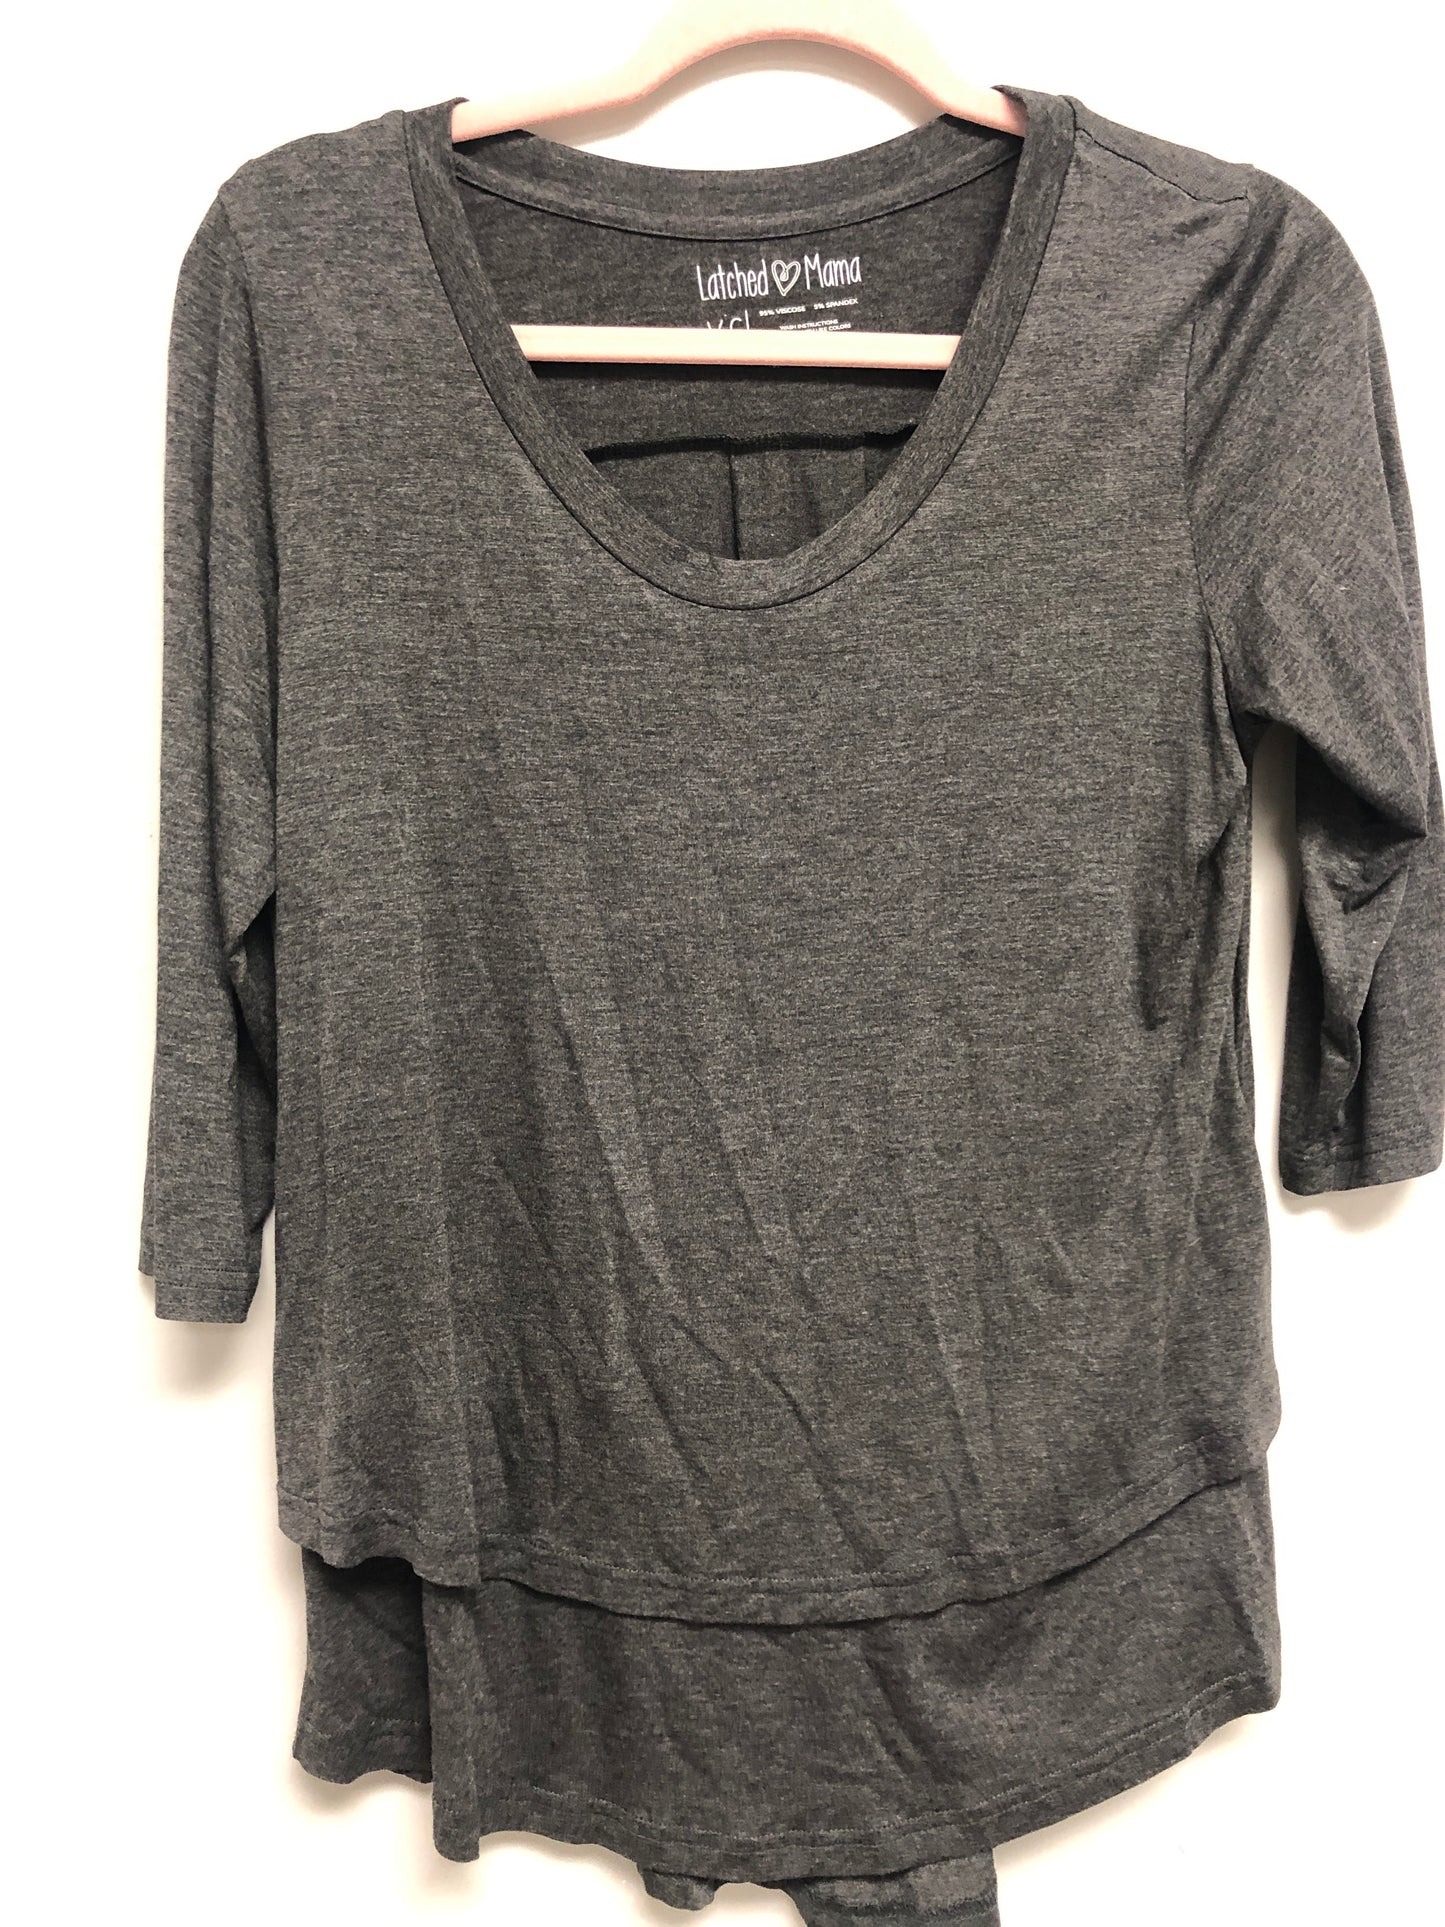 Outlet 6414 - Latched Mama 3/4 Sleeve Scoop Neck Nursing Top 2.0 - Charcoal - Extra Small